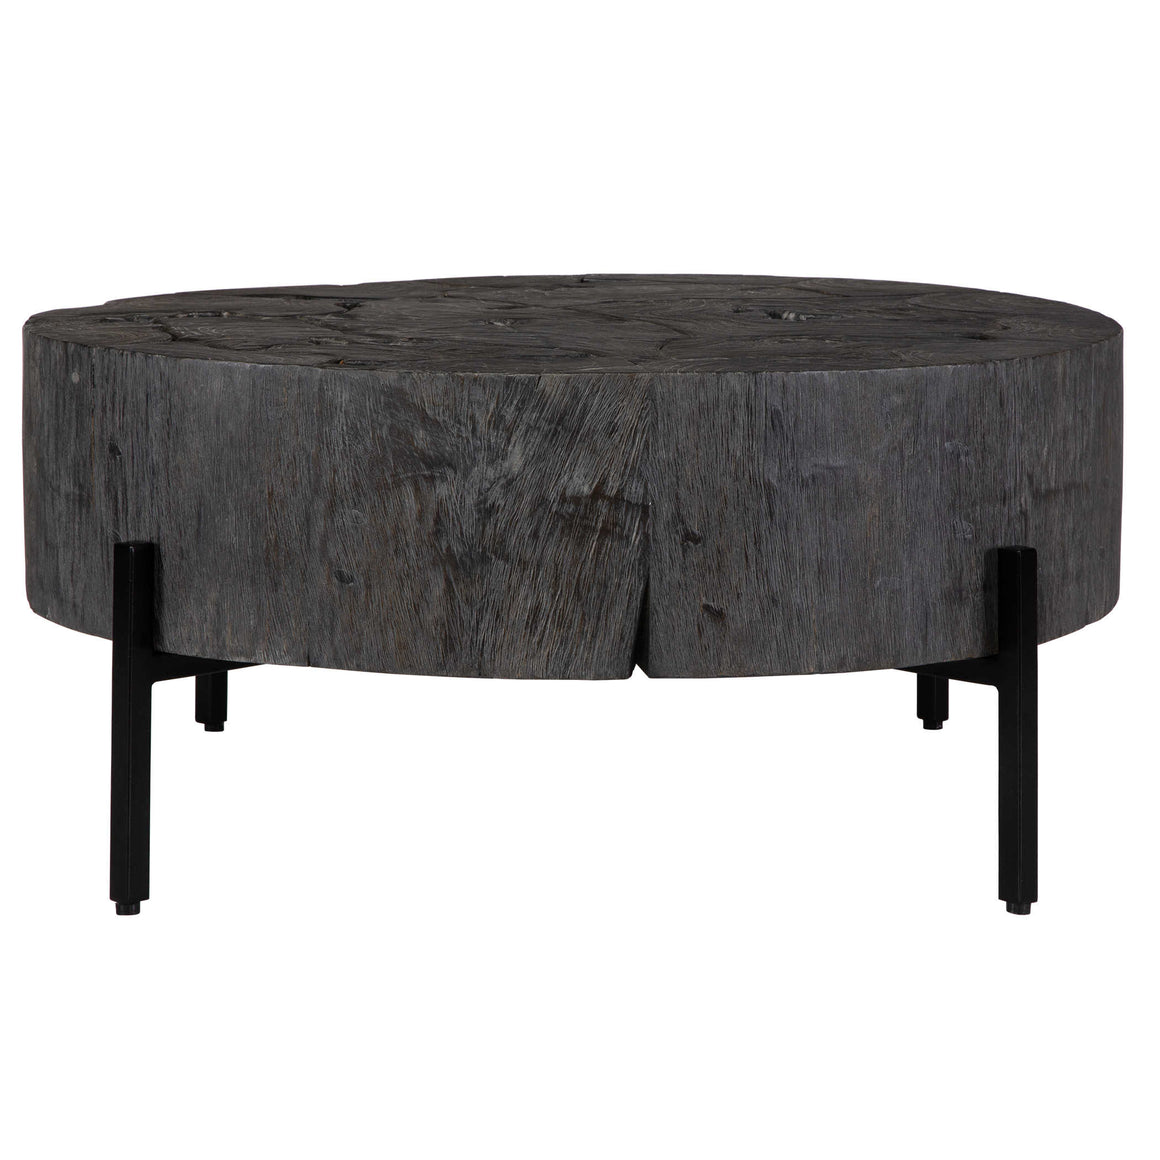 Uttermost Adjoin Rustic Black Coffee Table